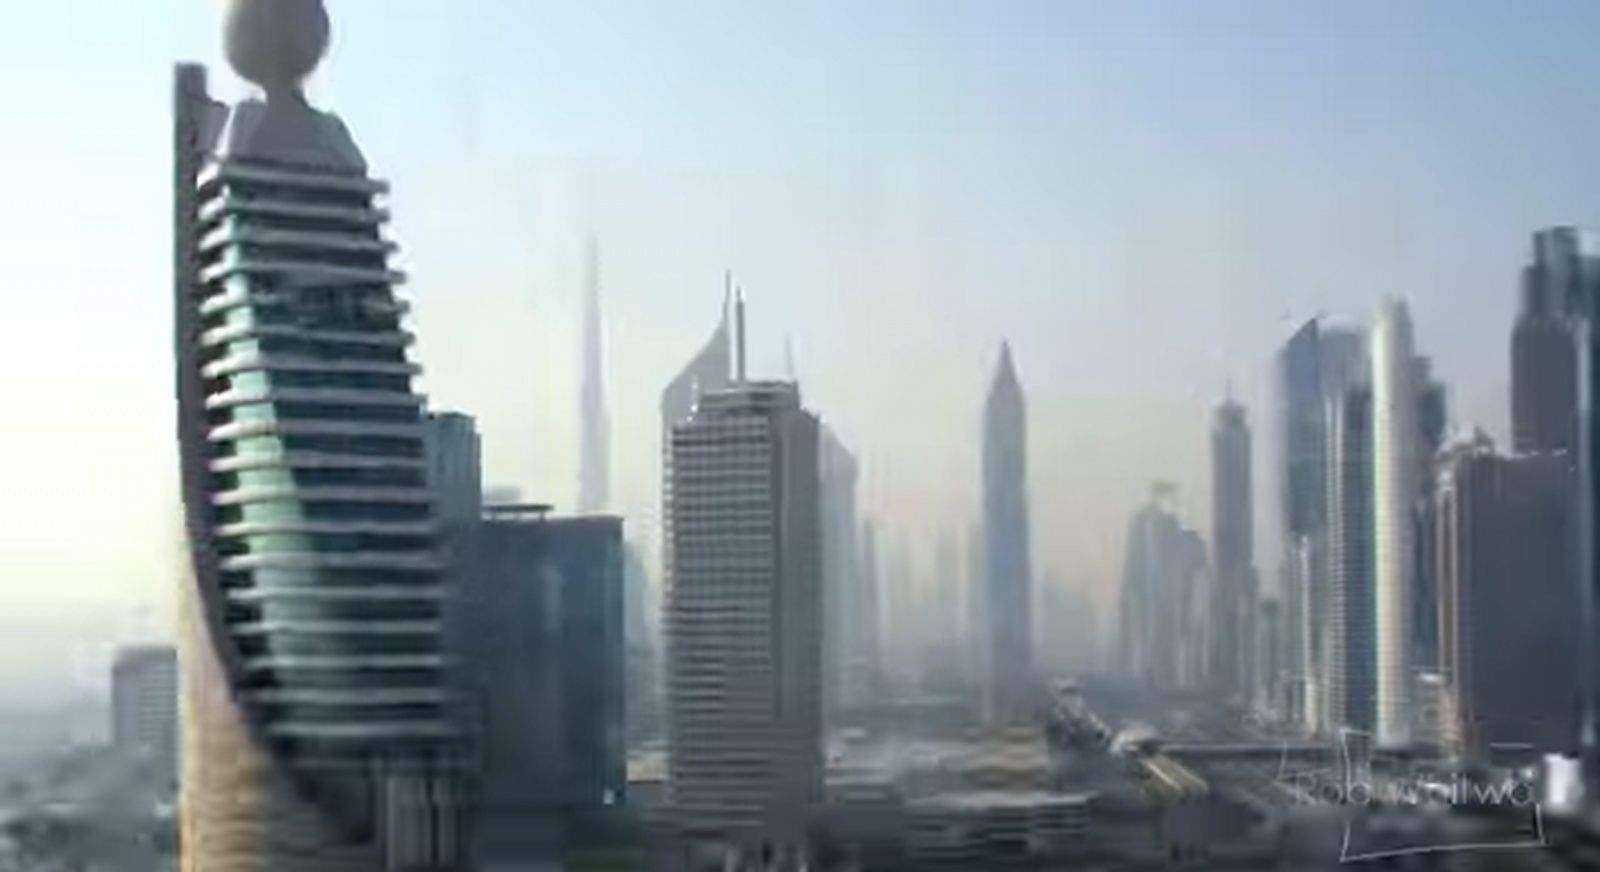 Dubai Flow Motion is the latest time-lapse video by travel photographer/filmmaker Rob Whitworth. Photo: Rob Whitworth/YouTube